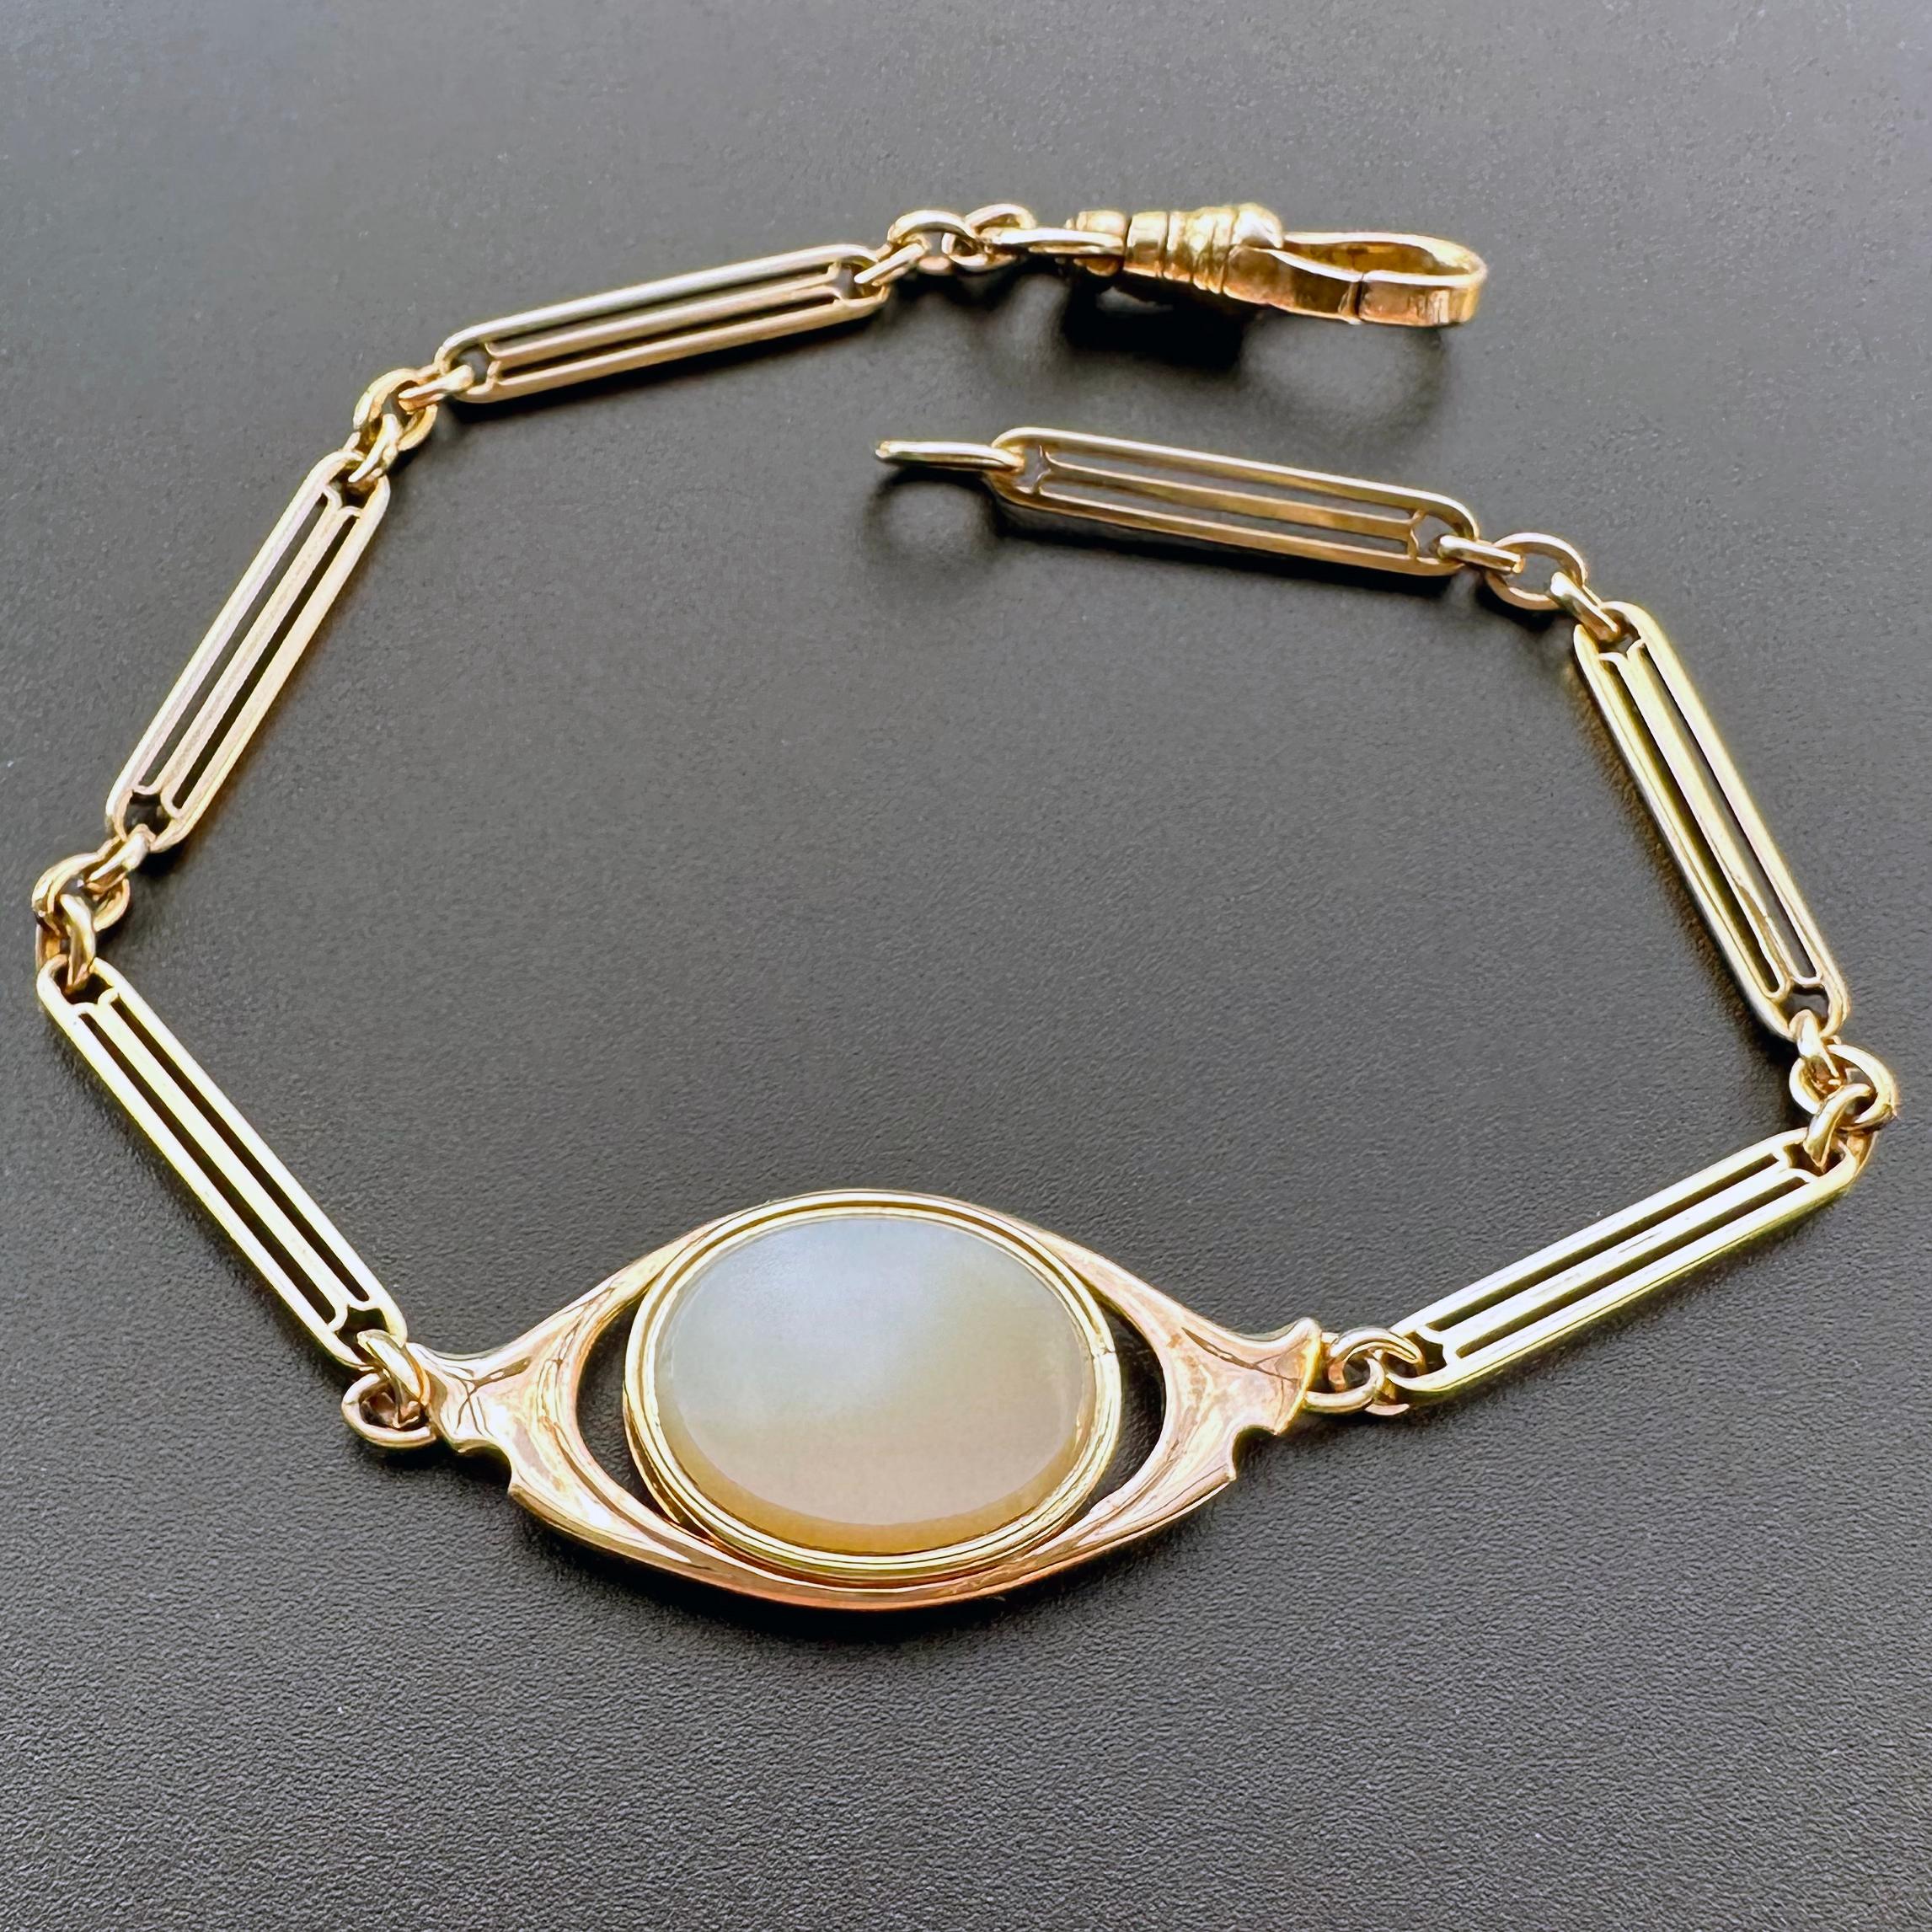 As a single piece, the style of this three-part upcycled bracelet mirrors the delicate, simple elegance of a fine lady’s wristwatch, but each of its elements carry their own secret layer of history and purpose. 

A 14k gold vintage watch chain and